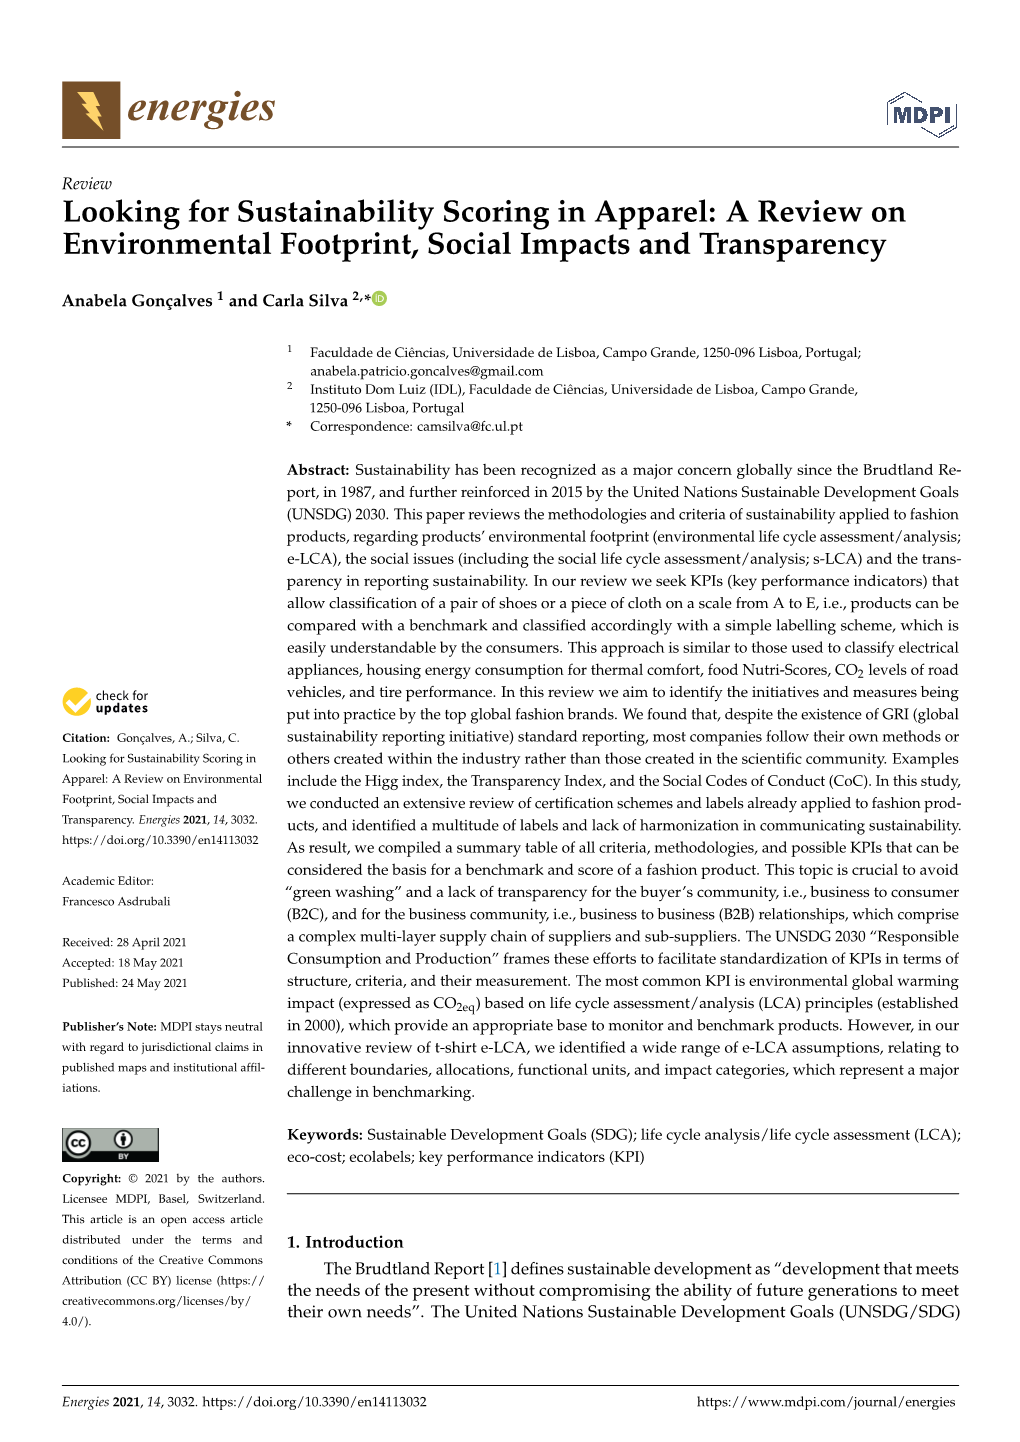 Looking for Sustainability Scoring in Apparel: a Review on Environmental Footprint, Social Impacts and Transparency